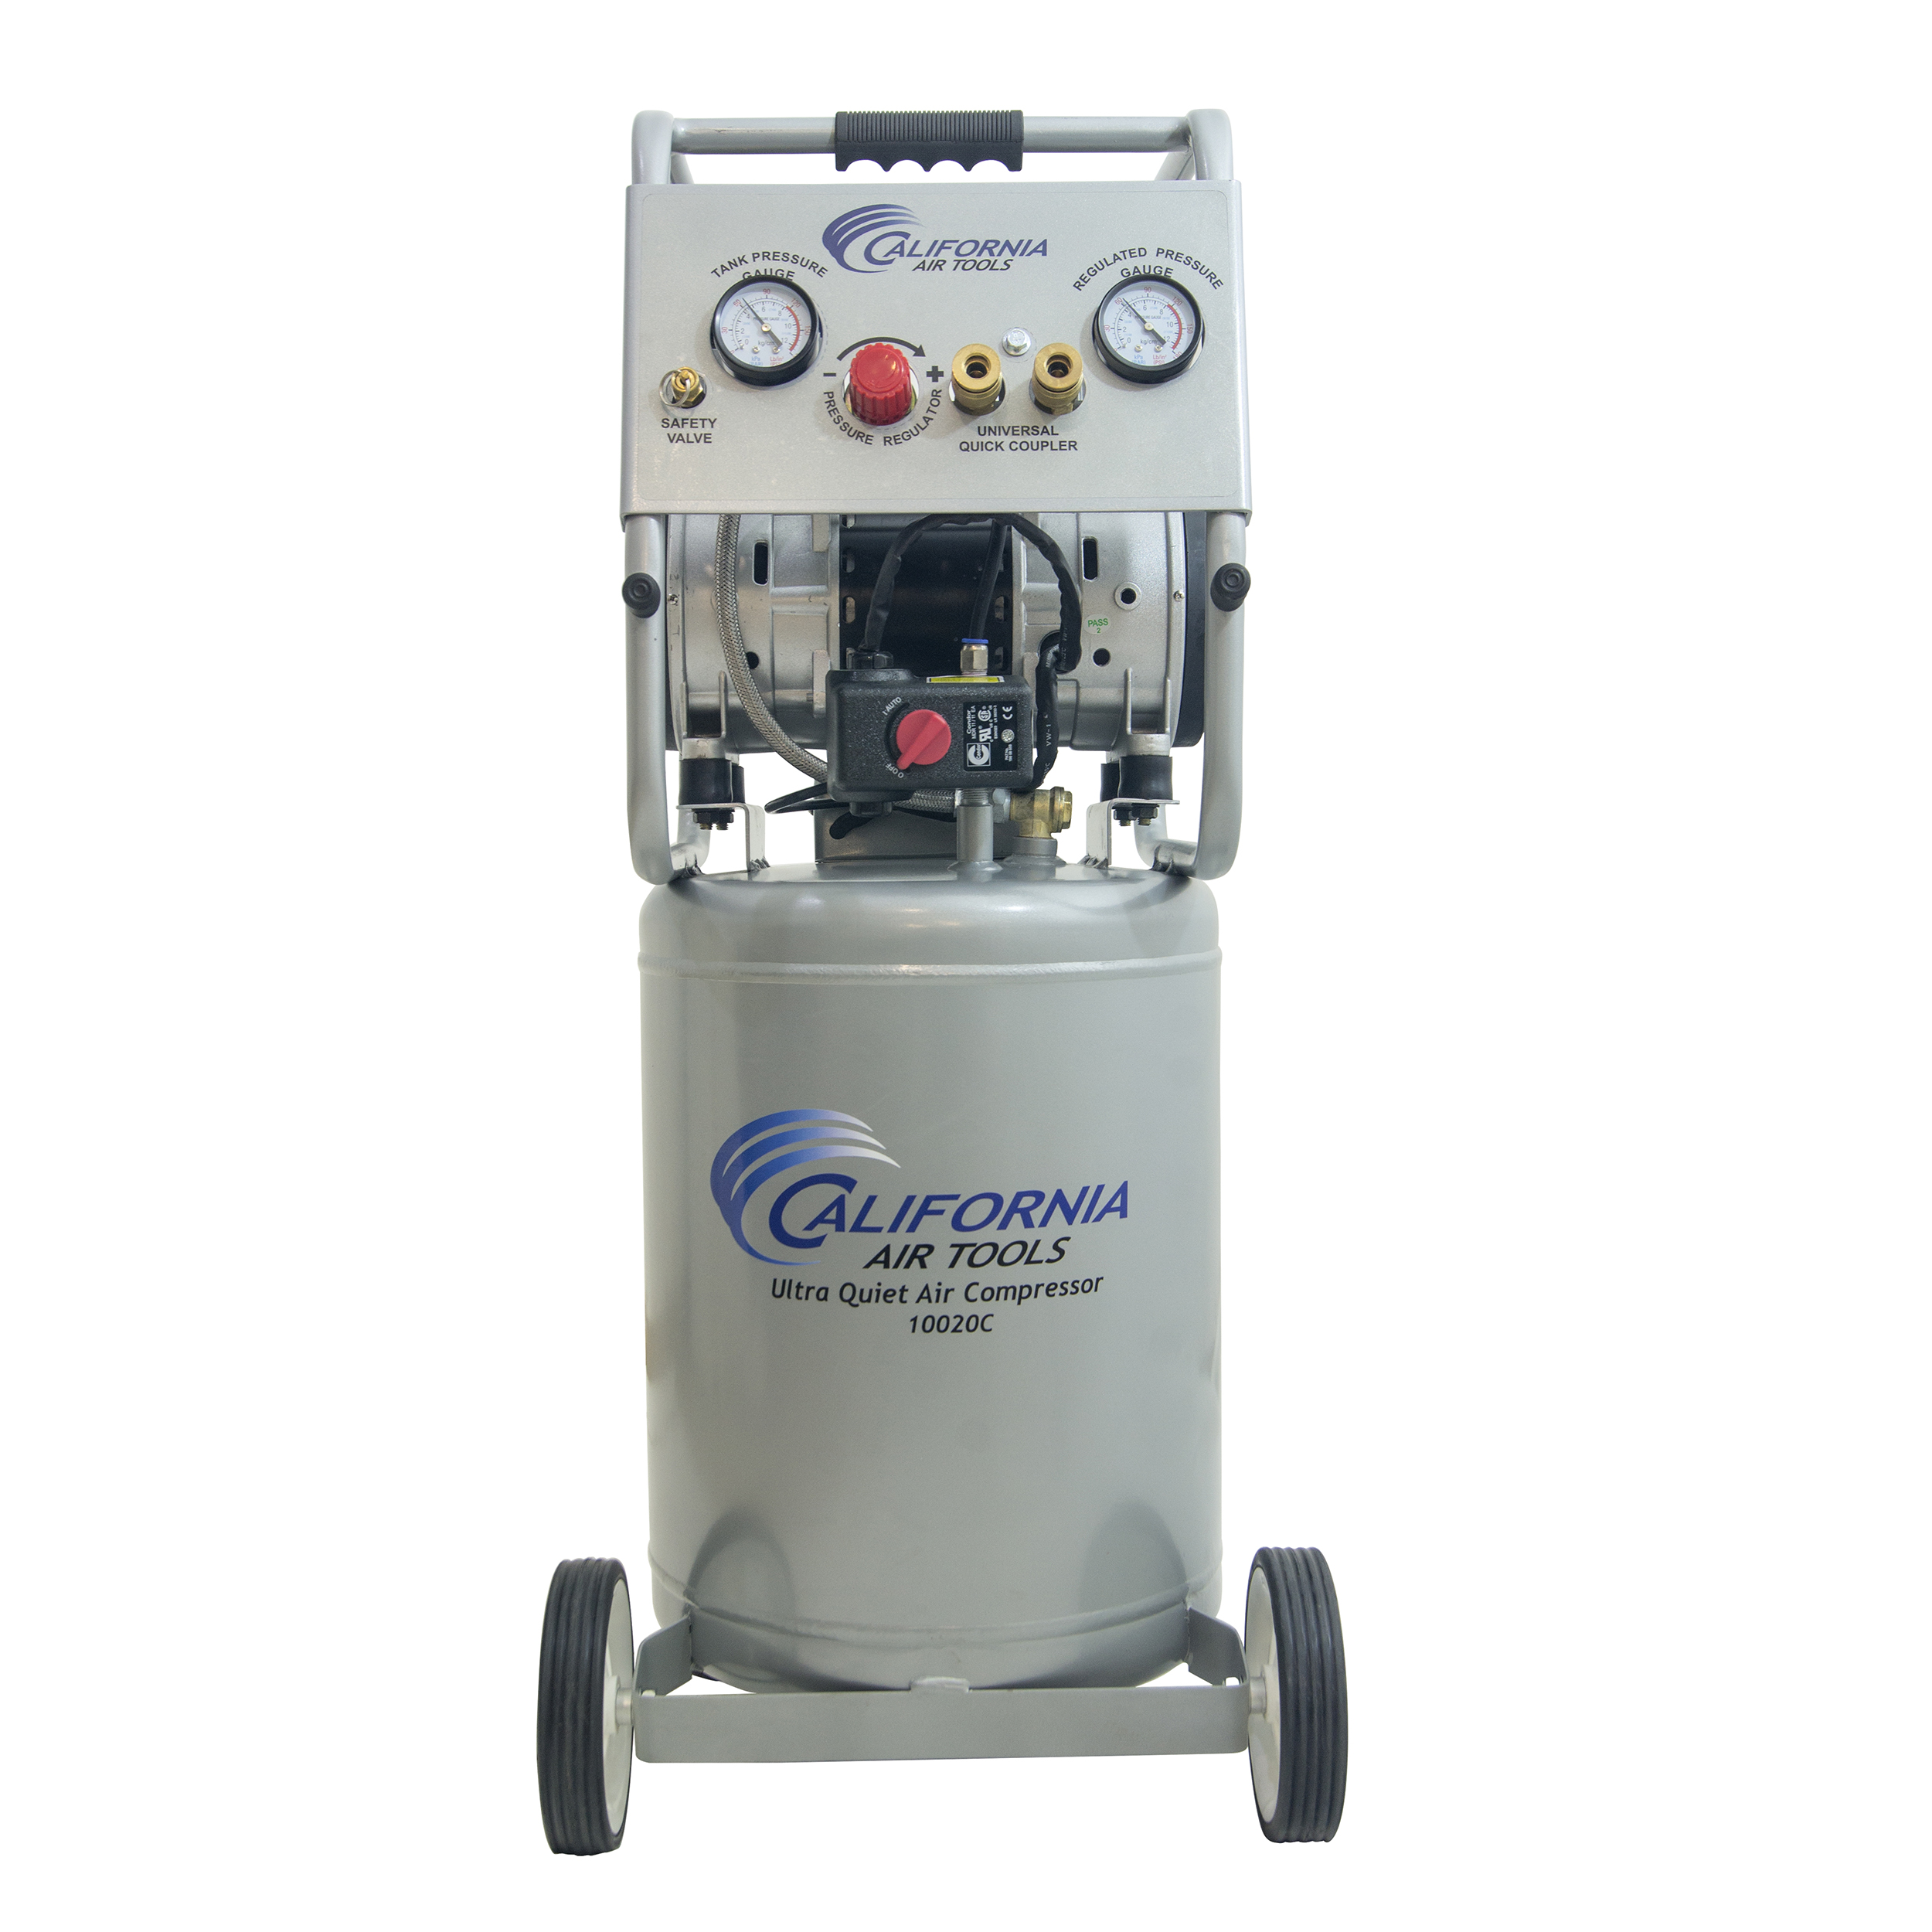 10020cad Ultra Quiet Oil-free Air Compressor, 2 Hp, 10 Gal., With Auto Drain Valve